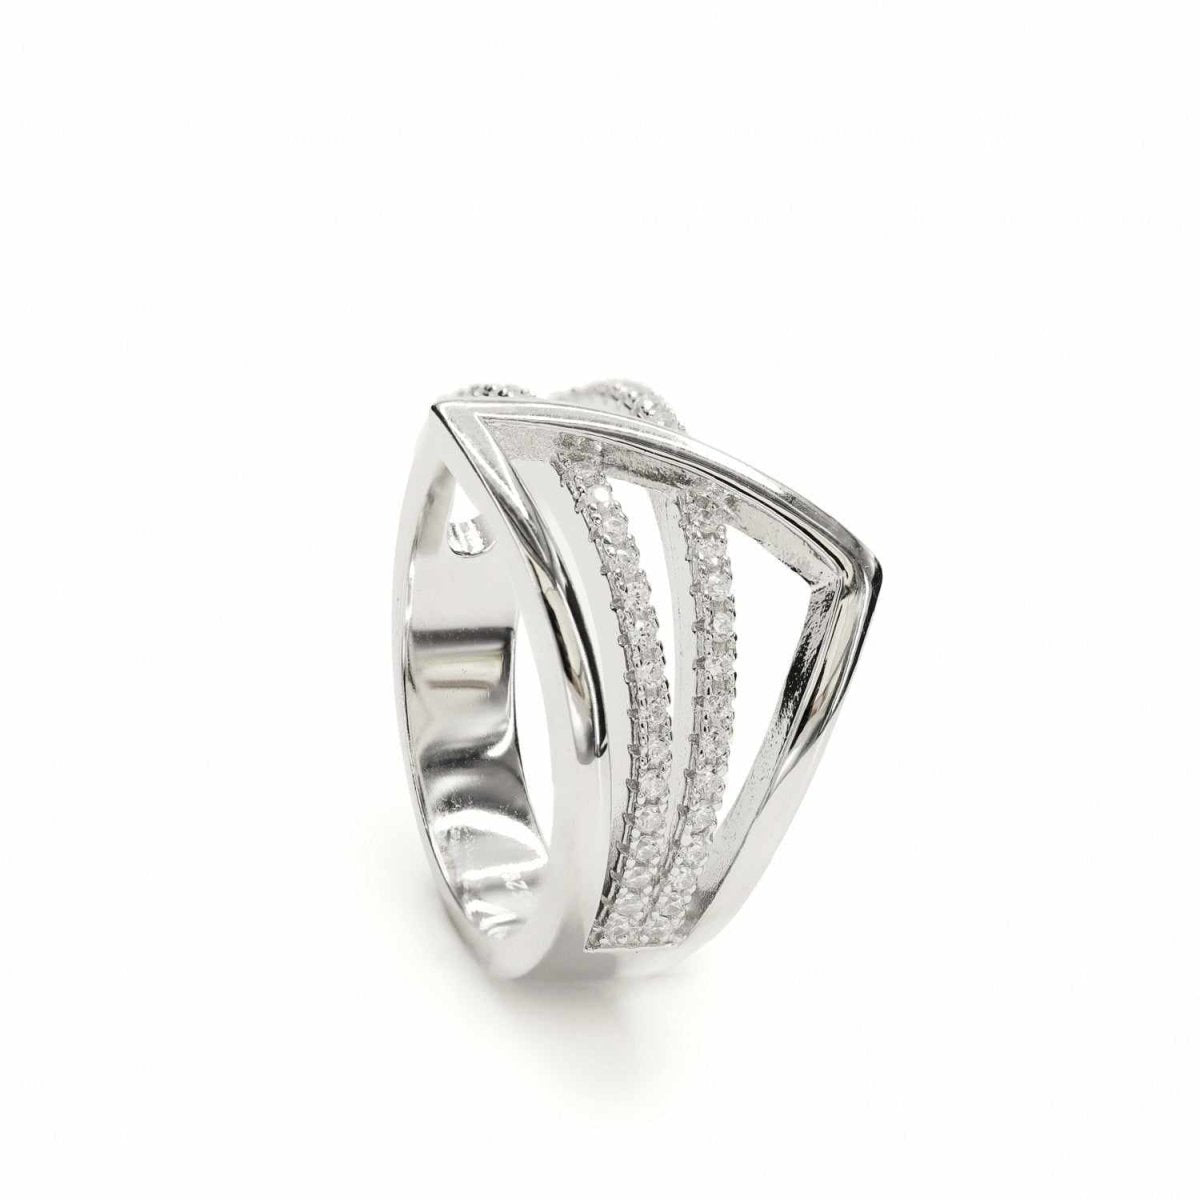 Ring - Wide silver rings with geometric design and zircons